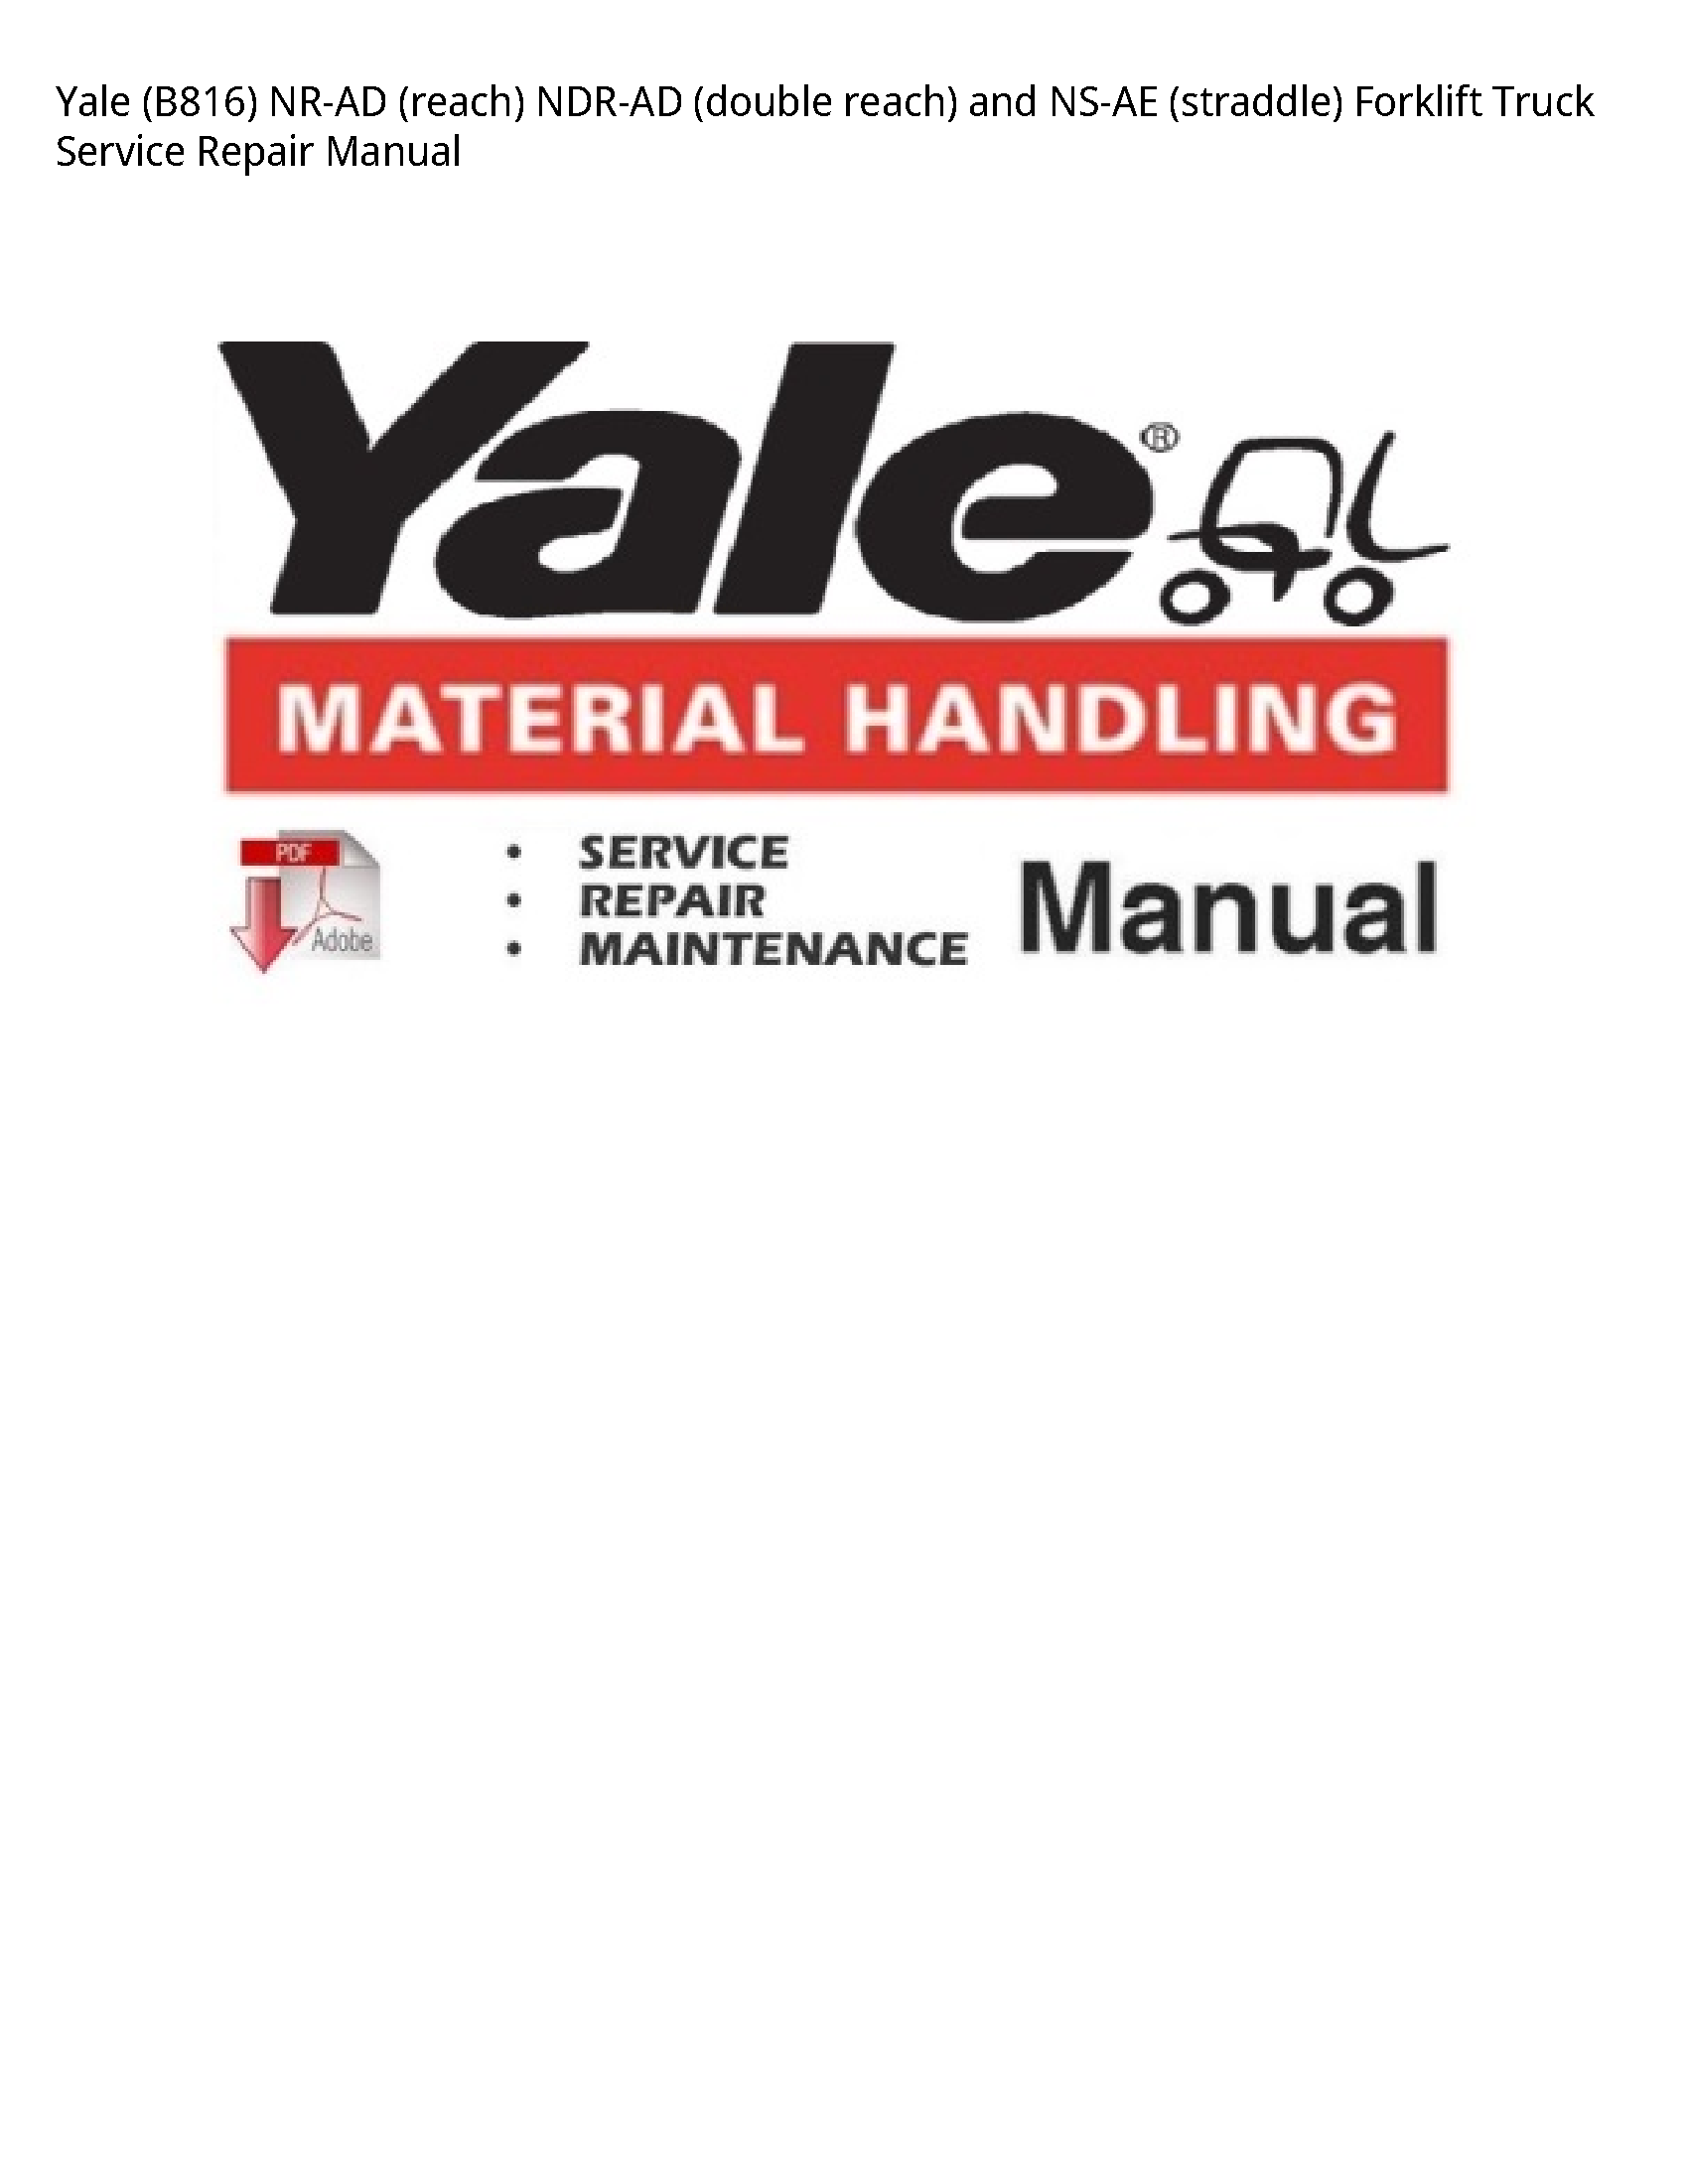 Yale (B816) NR-AD (reach) NDR-AD (double reach)  NS-AE (straddle) Forklift Truck manual